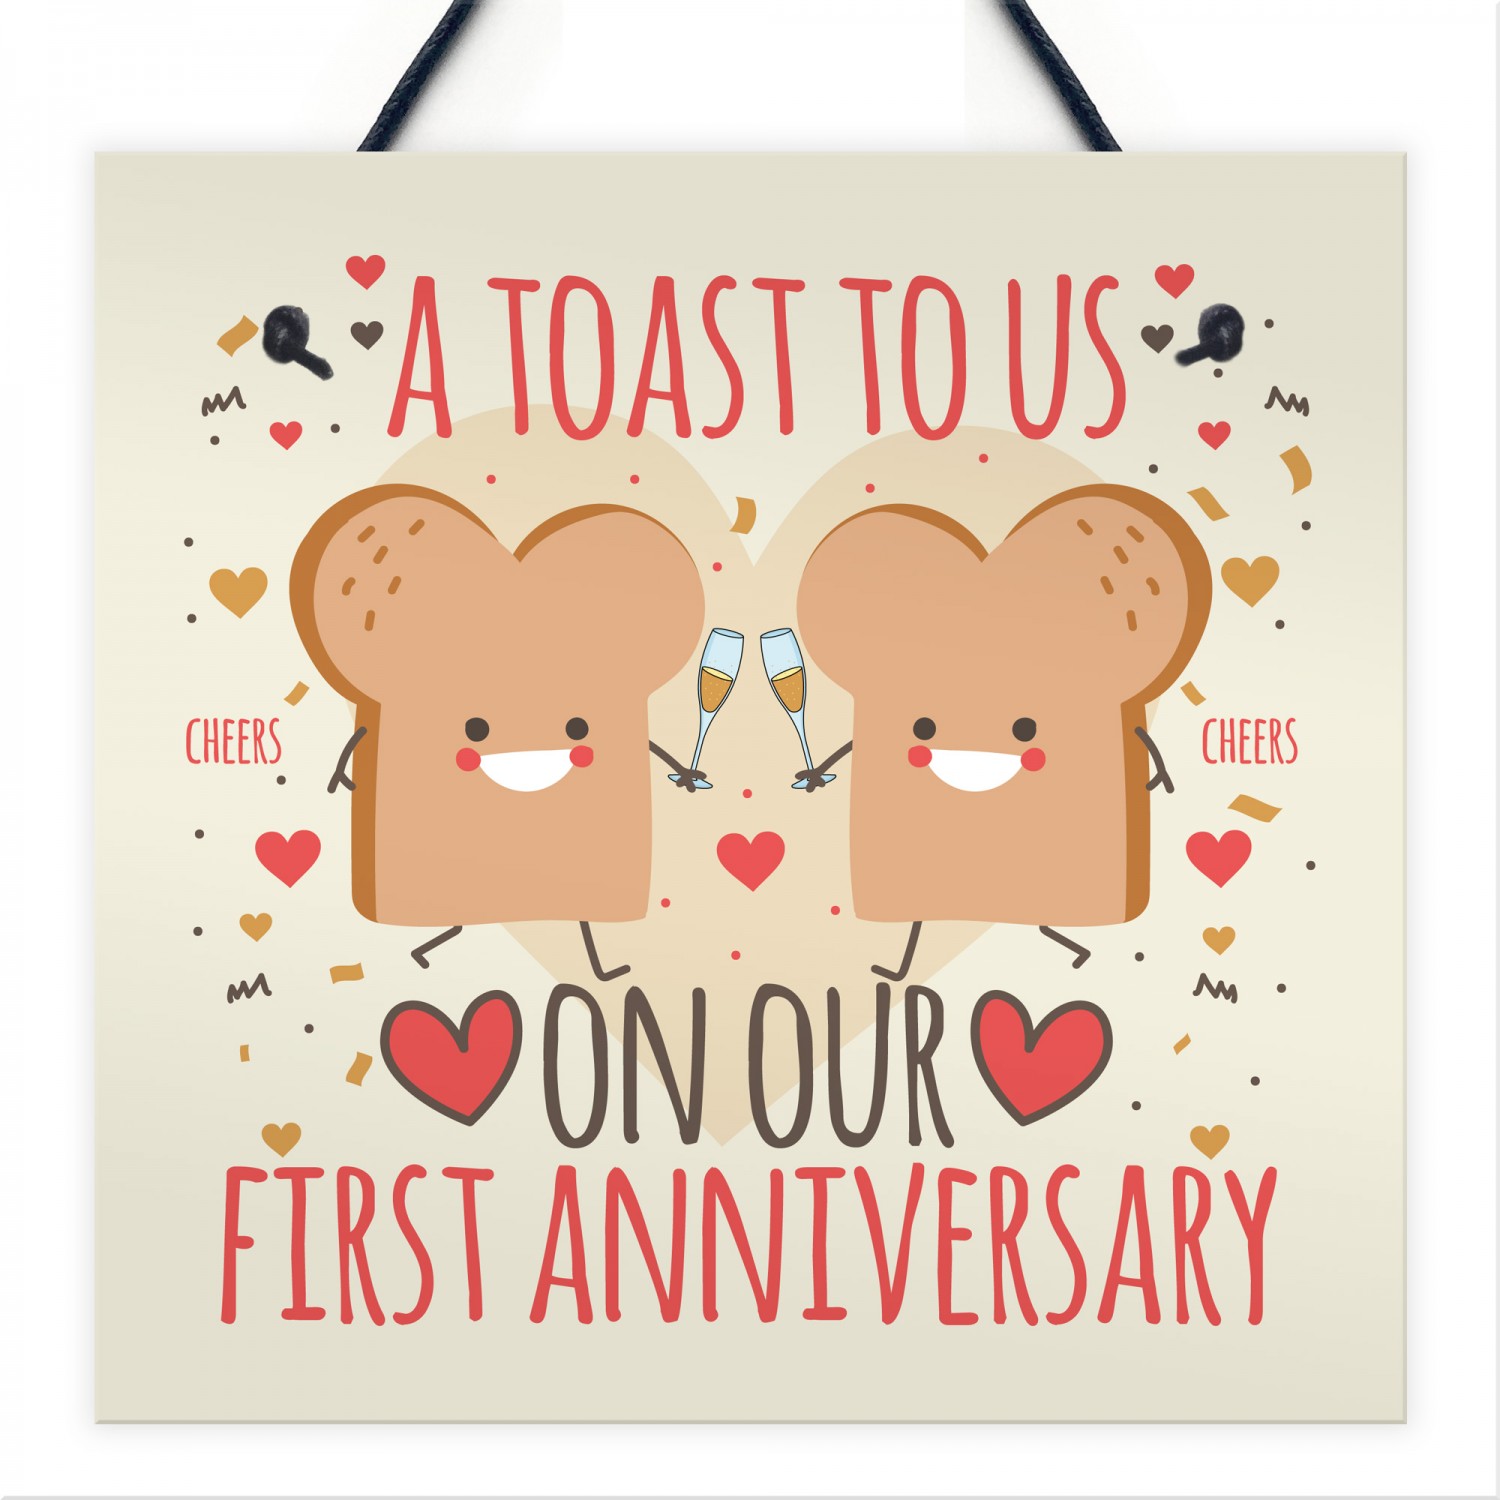 Funny Anniversary Gifts
 Funny Joke Anniversary Card For Him Her First Anniversary